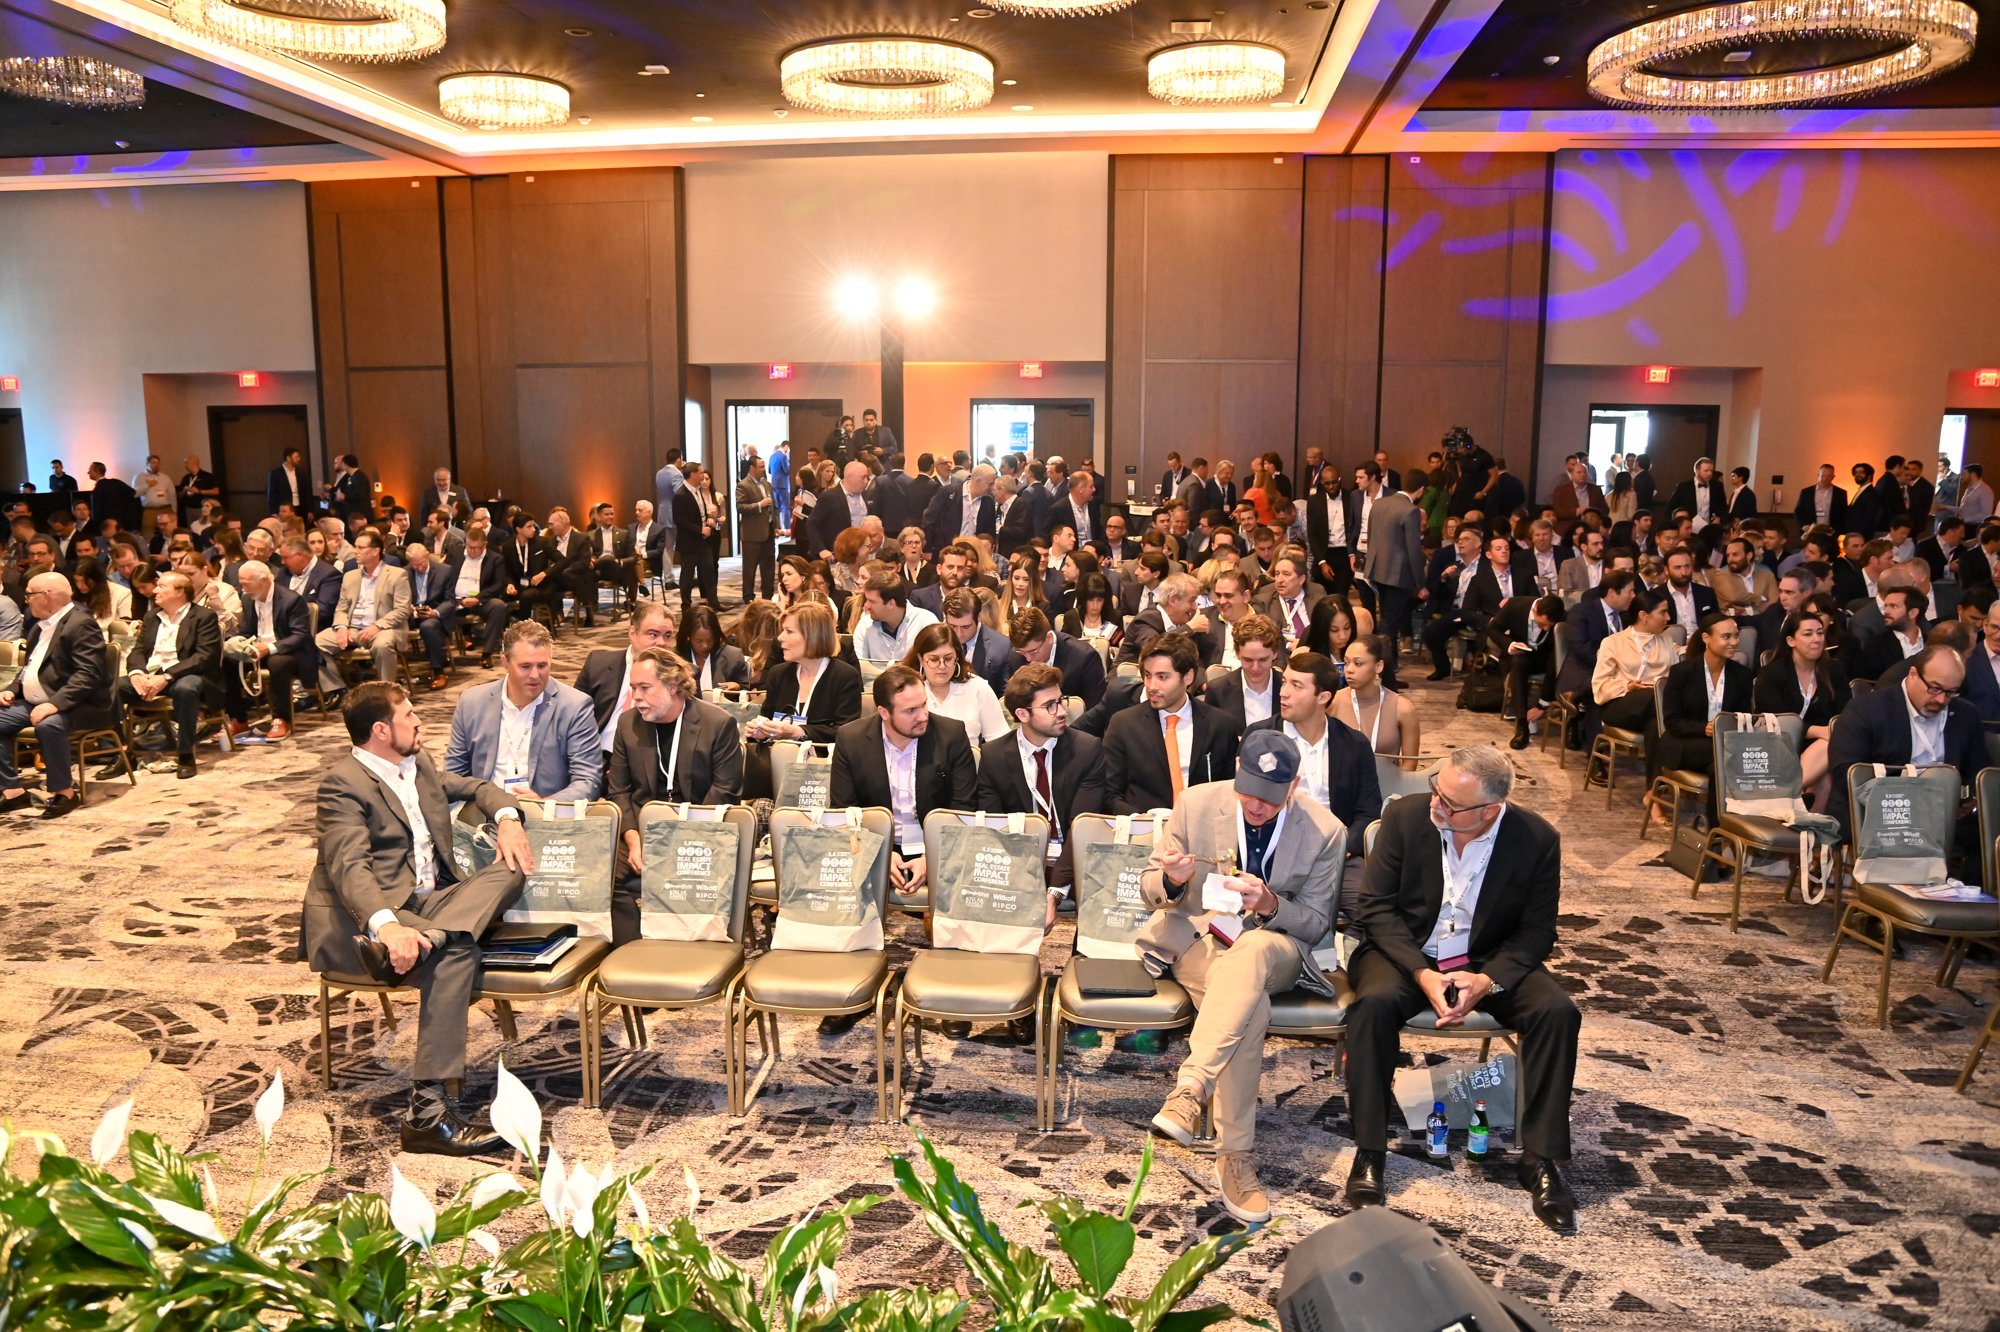 University of Miami Real Estate Impact Conference 2023 The Largest Edition Yet As Real Estate Leaders Discuss The State of Miami Real Estate 277.jpg